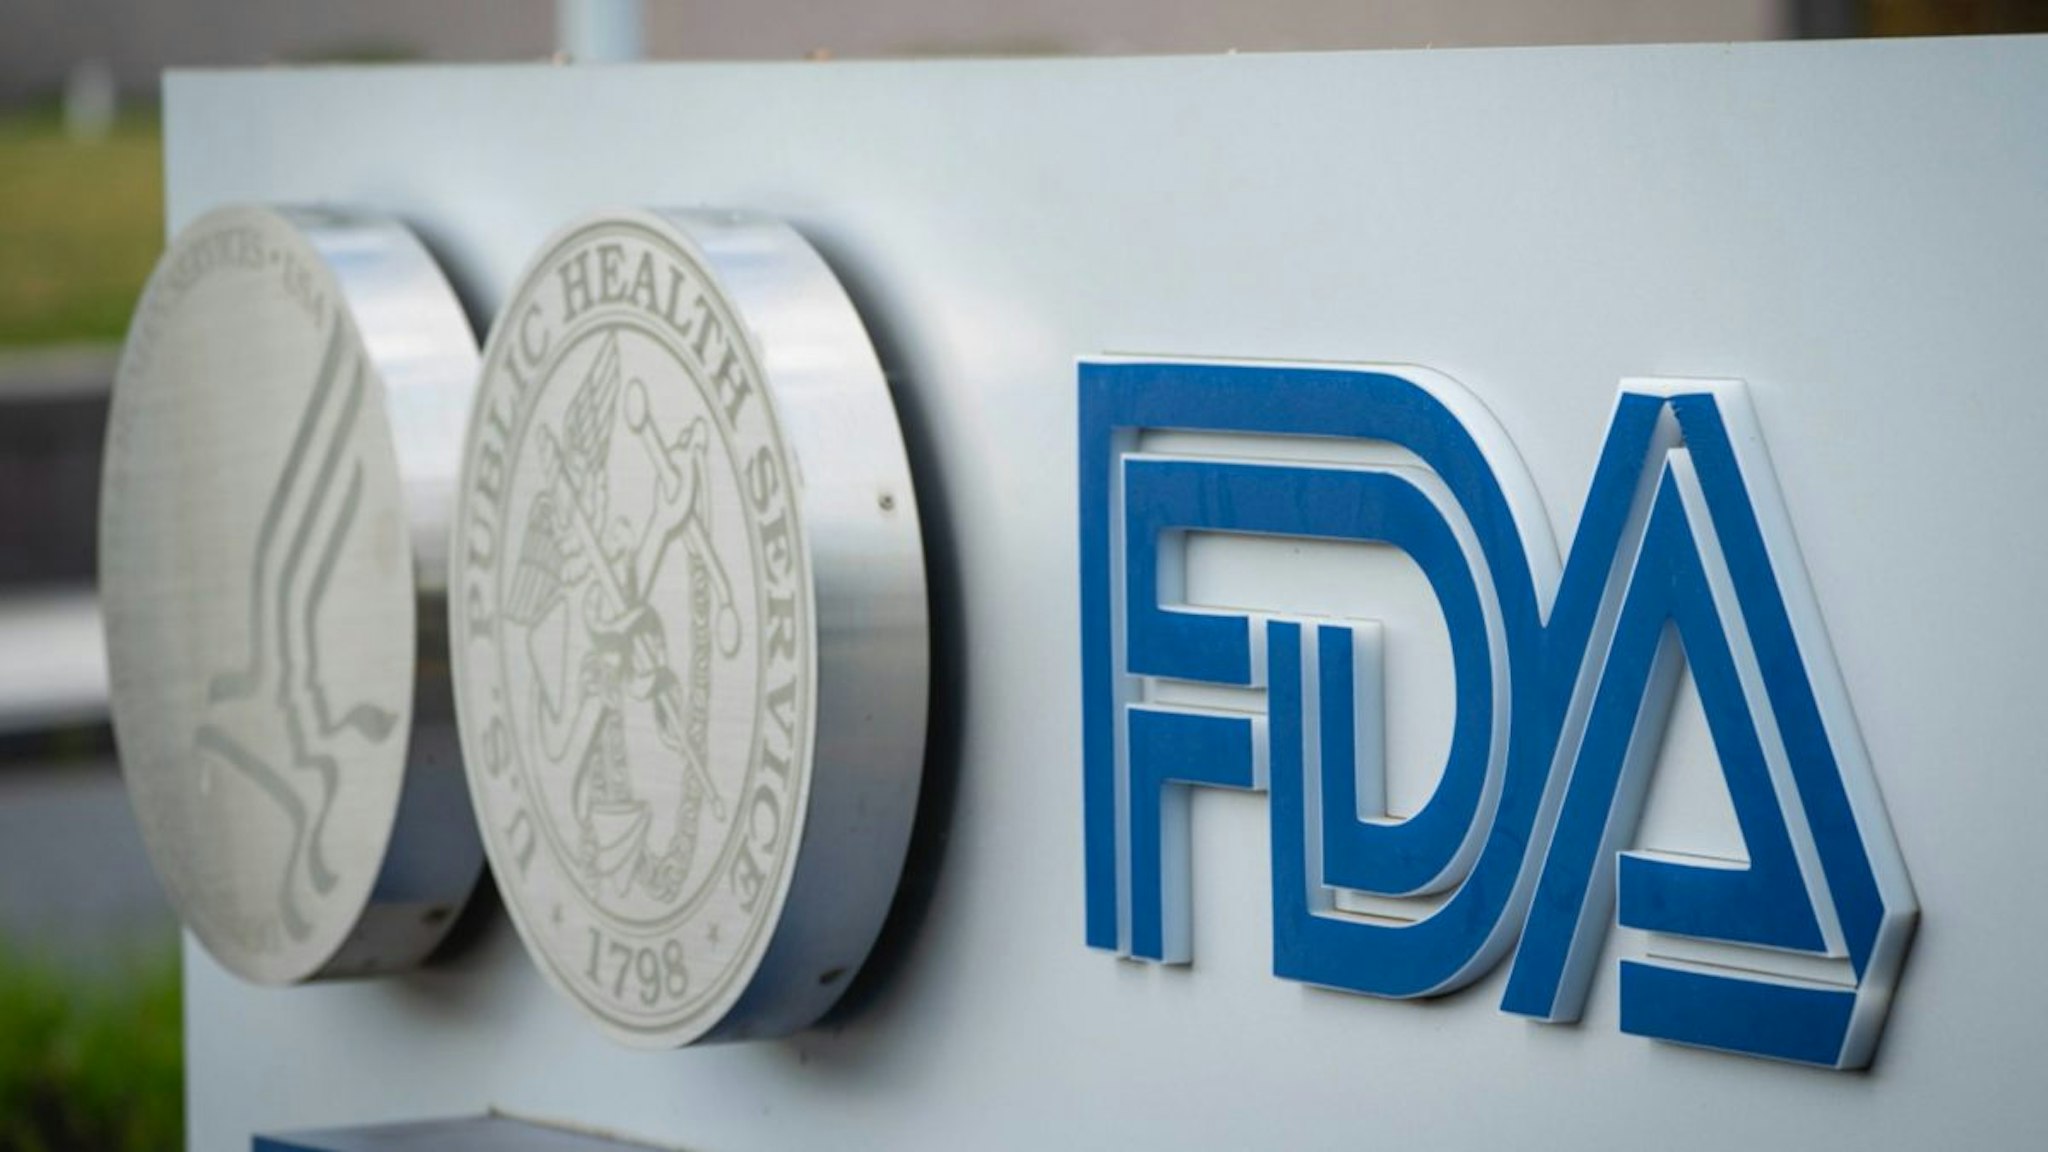 A sign for the Food And Drug Administration is seen outside of the headquarters on July 20, 2020 in White Oak, Maryland.